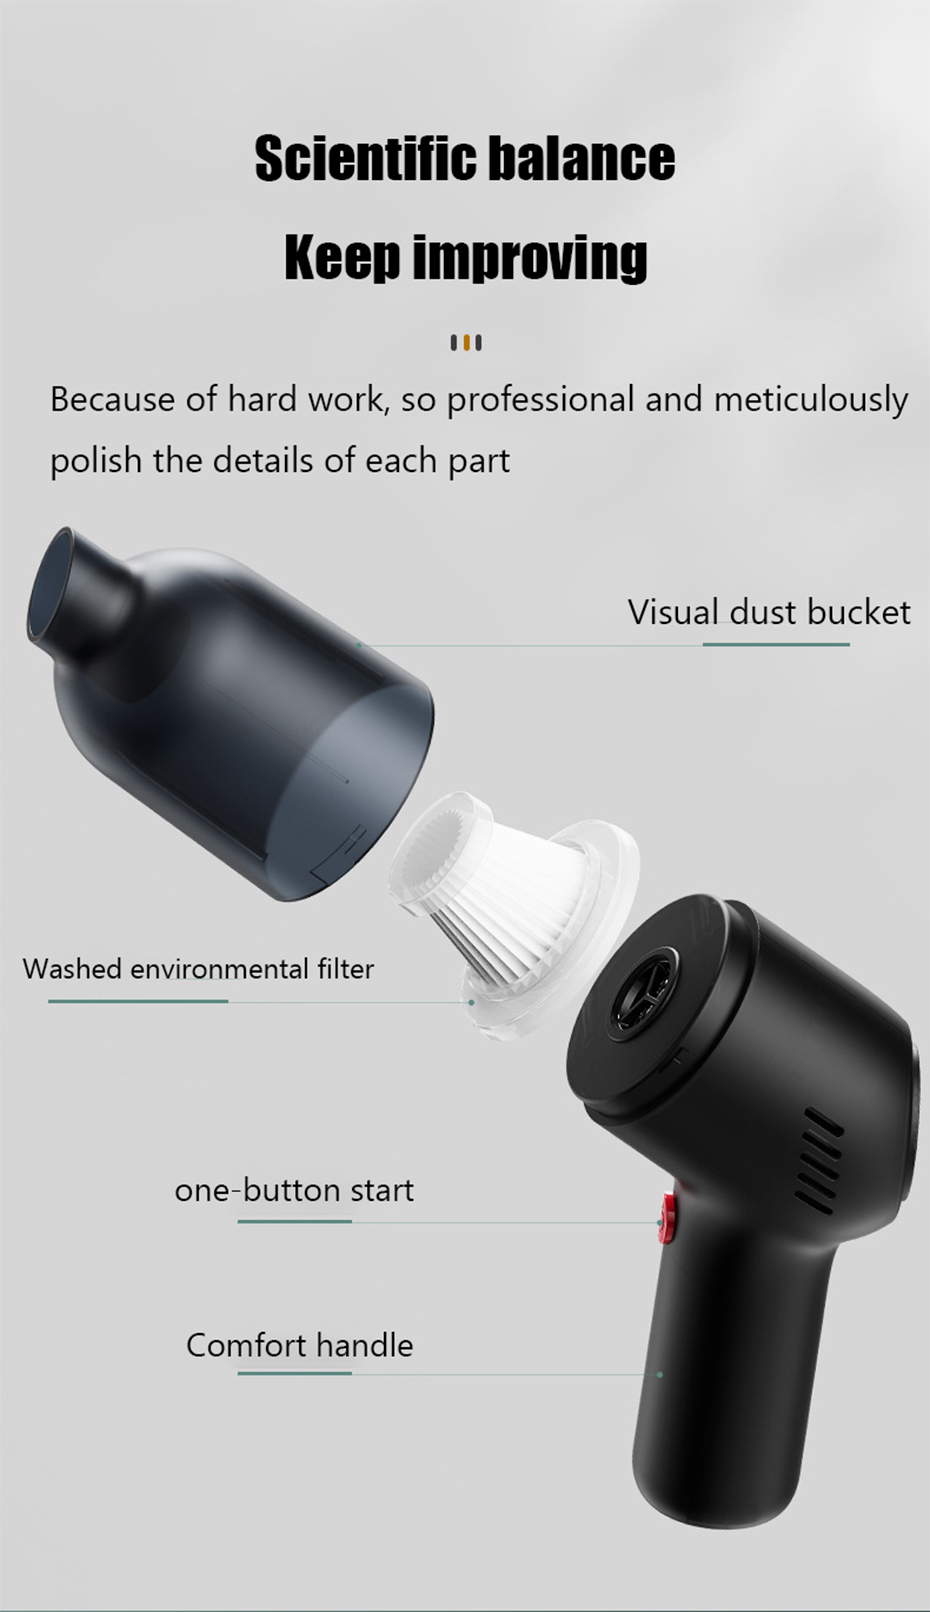 TOMULE Wireless Car Vacuum Cleaner Handheld Portable Vaccum Cleaner Cordless/Car Plug for Car Home Wet/Dry dual-use